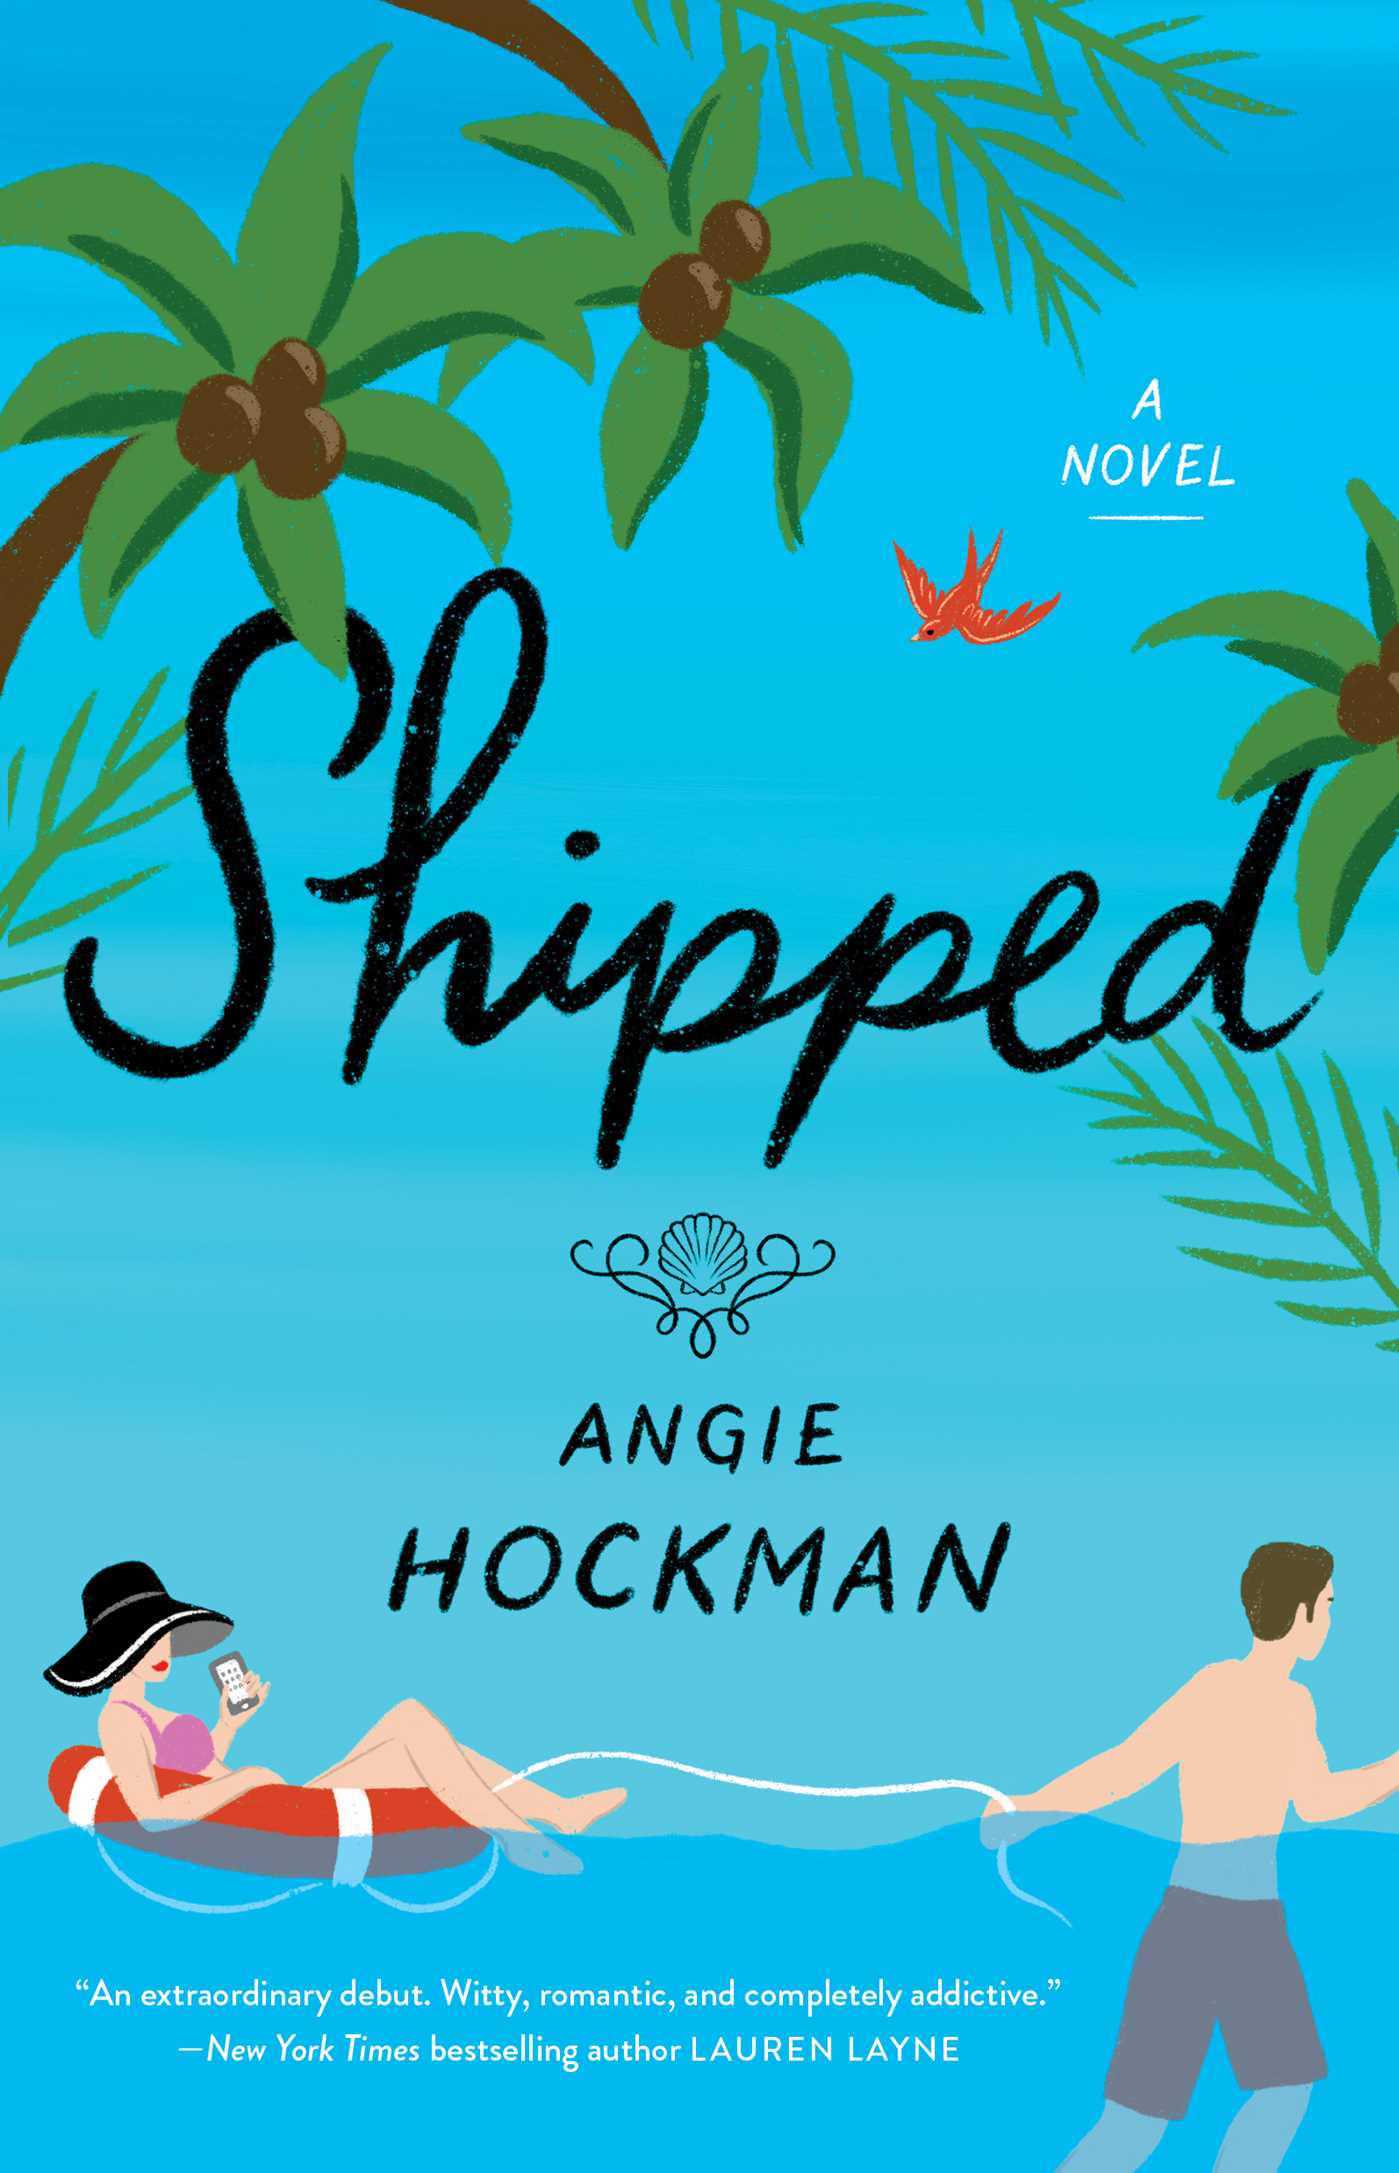 Shipped by Angie Hockman, book cover